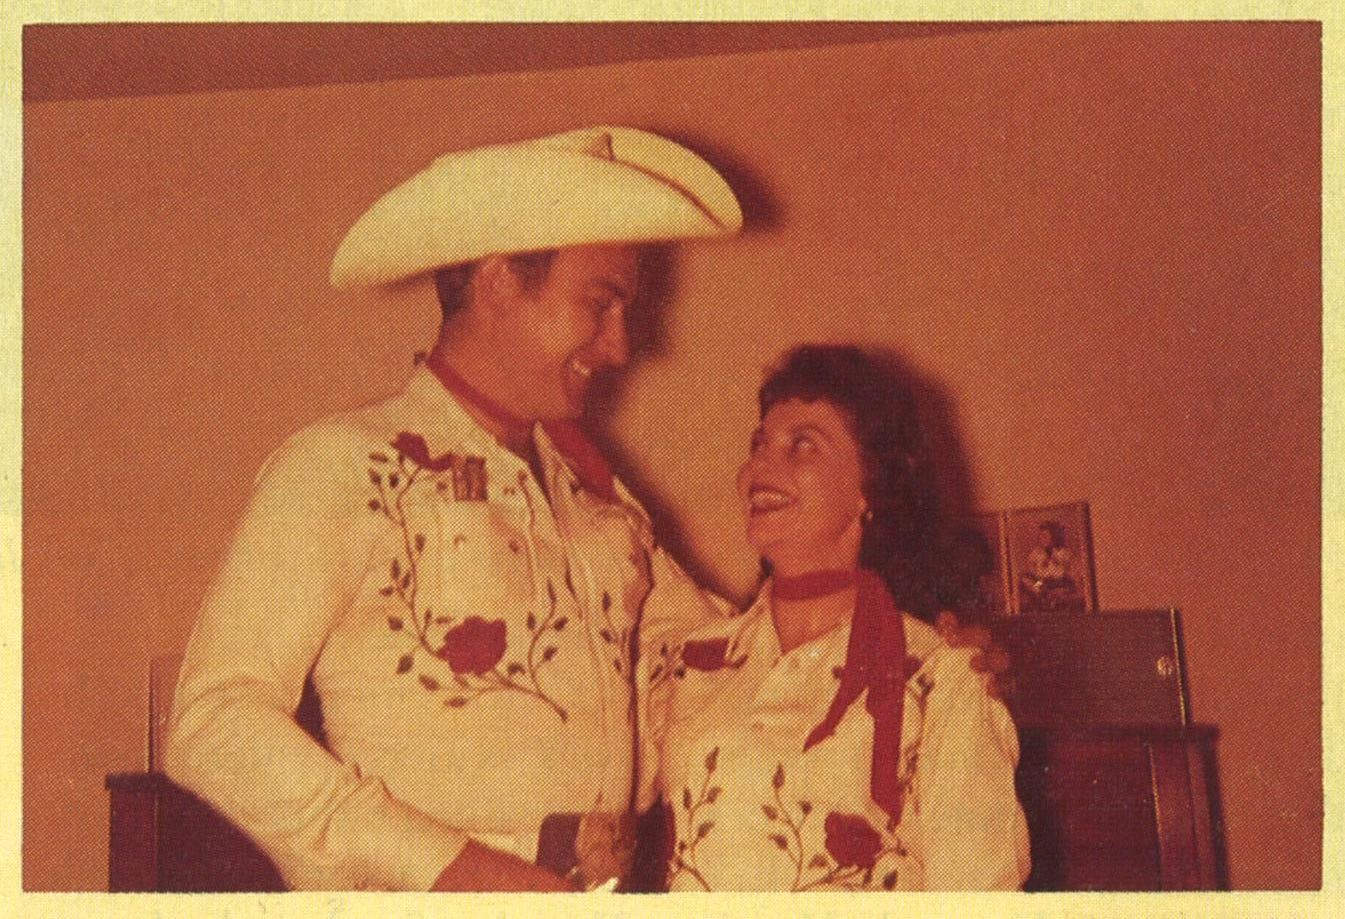 1959: Tommy and Charlene Hancock, the swing scene's king and queen, in costume.